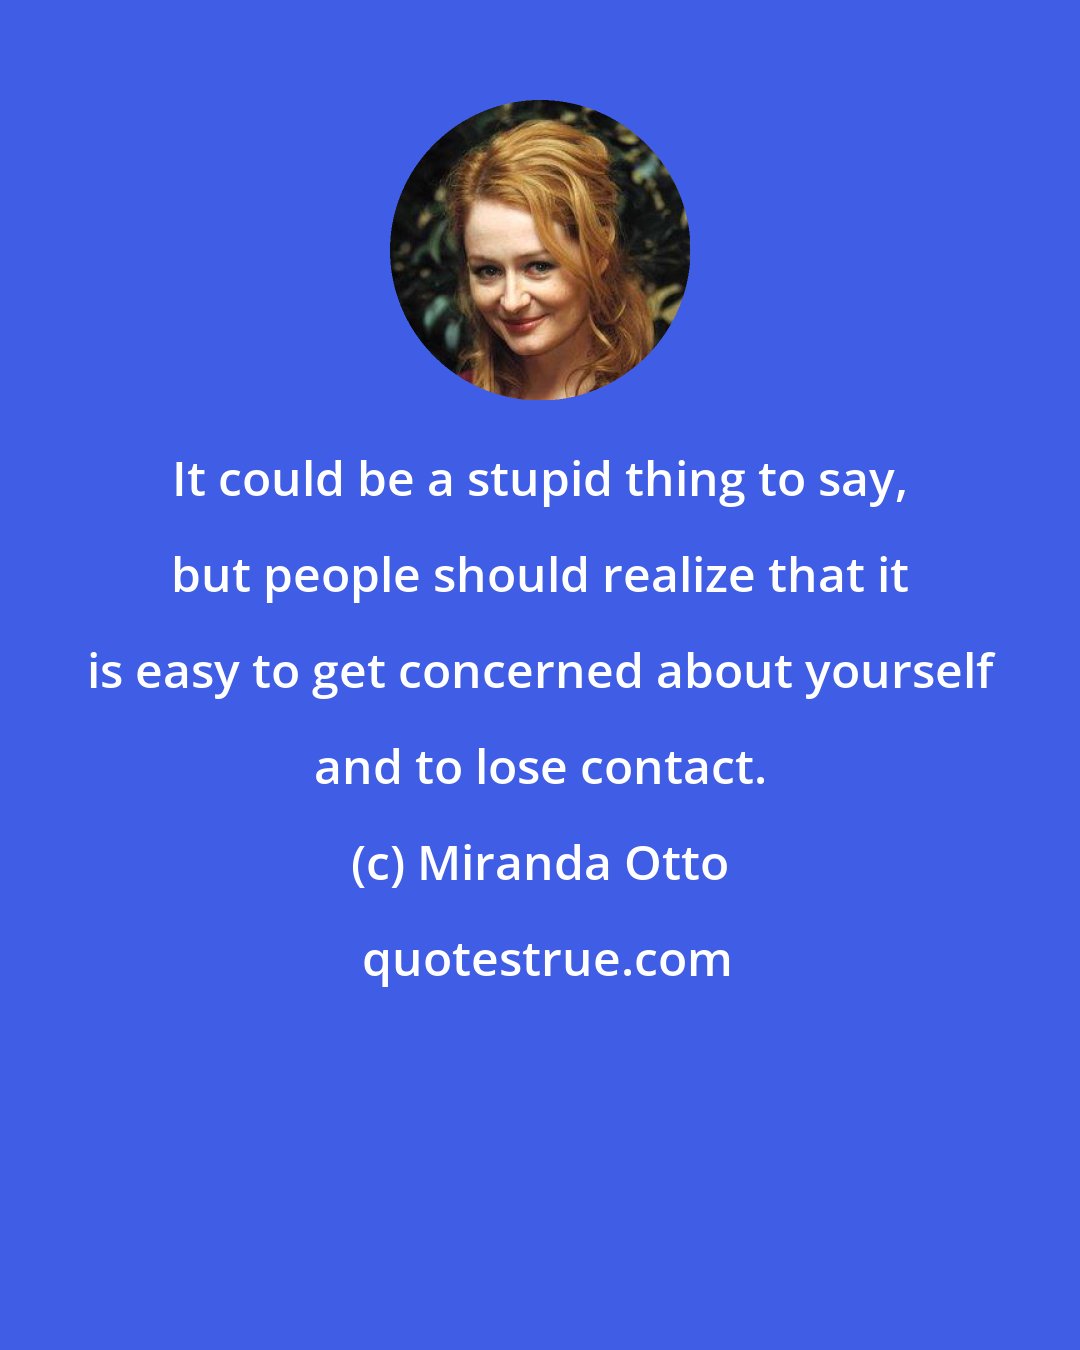 Miranda Otto: It could be a stupid thing to say, but people should realize that it is easy to get concerned about yourself and to lose contact.